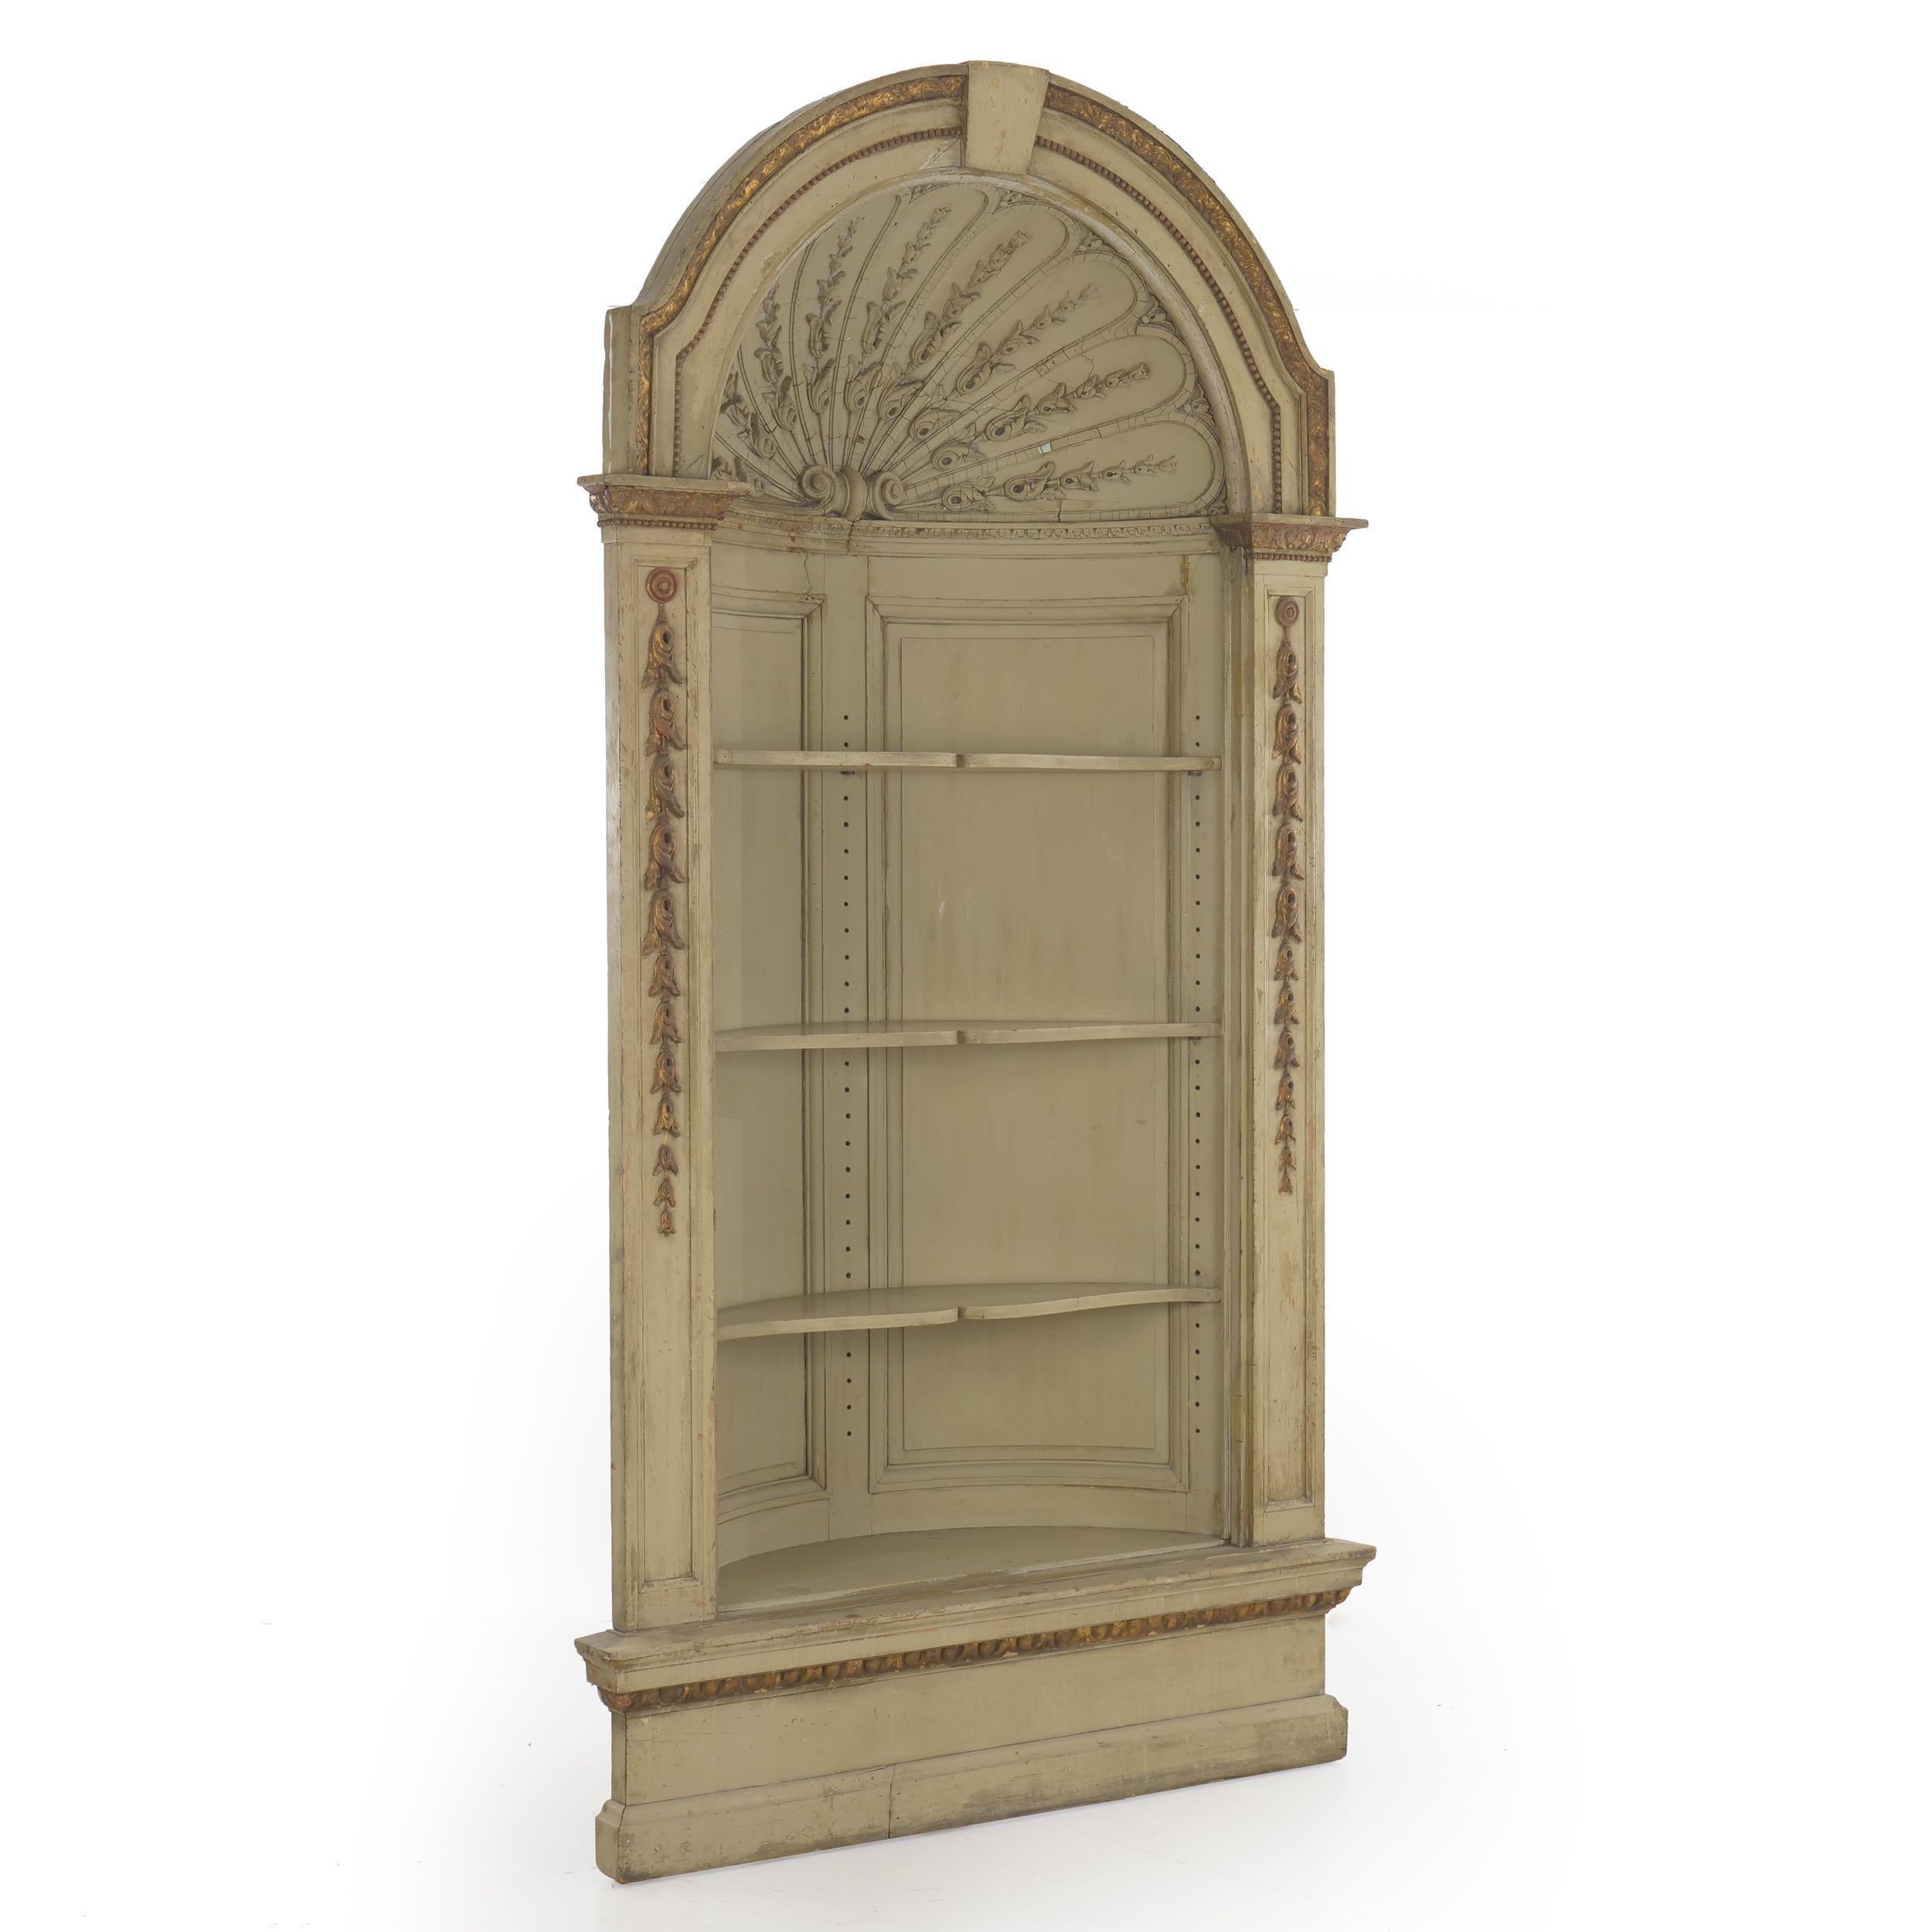 NEOCLASSICAL PARCEL-GILT PAINTED CORNER CUPBOARD
Circa late 19th century
Item # 911PZA24Q

A fantastic neoclassical built-in cupboard from the late 19th century, this gorgeous piece is worn with a great surface history in the early gray-beige paint,